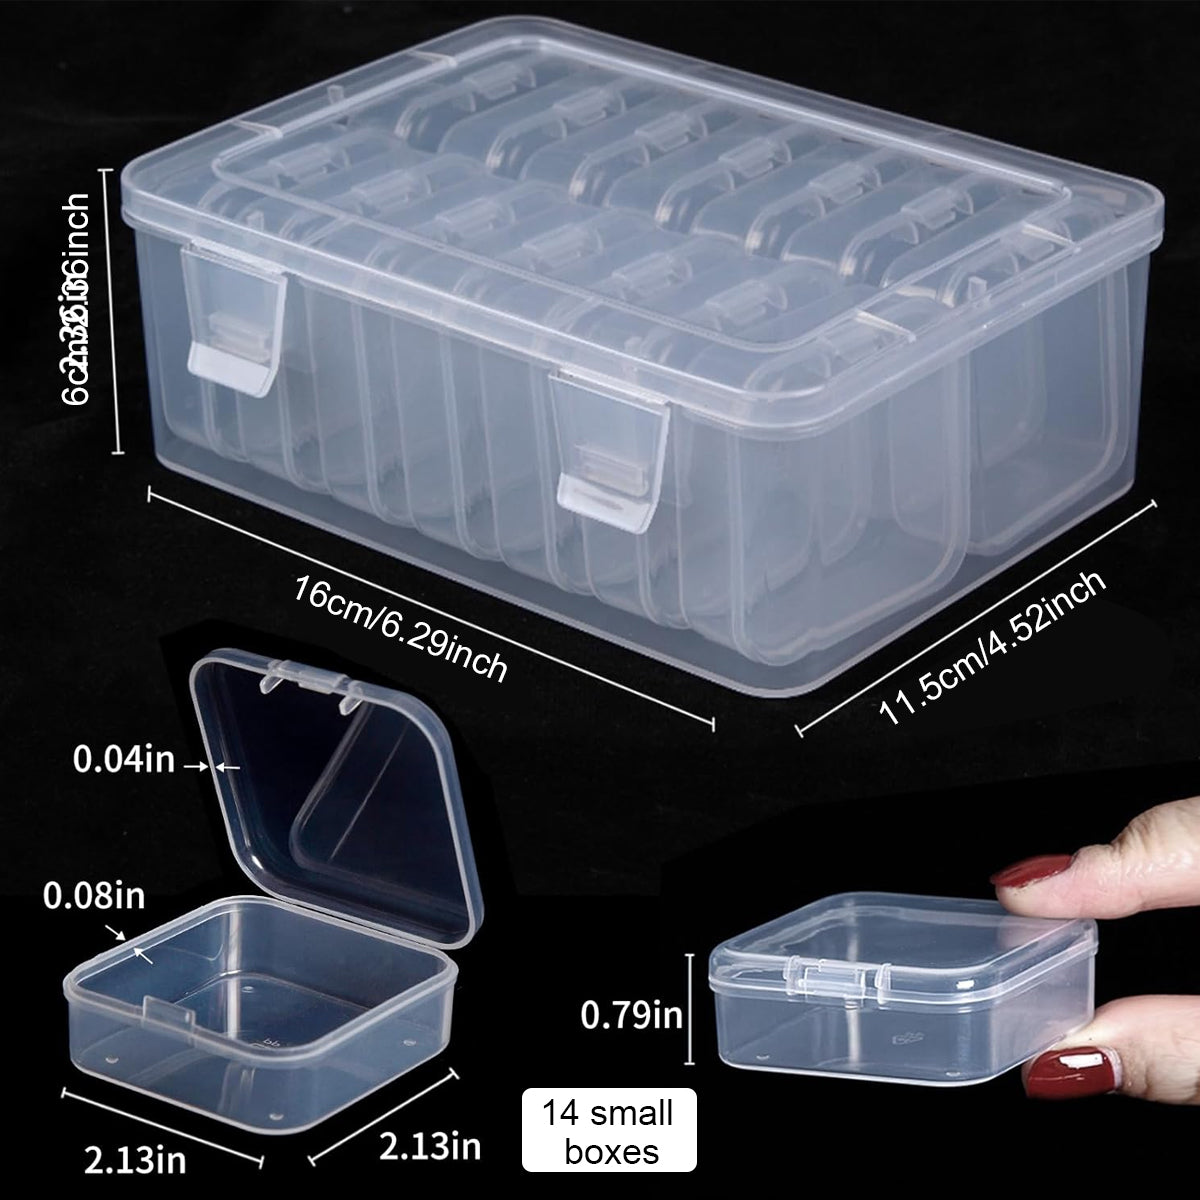 HASTHIP® Transparent Jewelry Organizer Box Set of 15Pcs PlasticOrganizer for Earrings, Ear Studs, Rings, Necklace, Accessories, Multi Purpose Storage Case for DIY Crafting, Beading, Diamond Painting